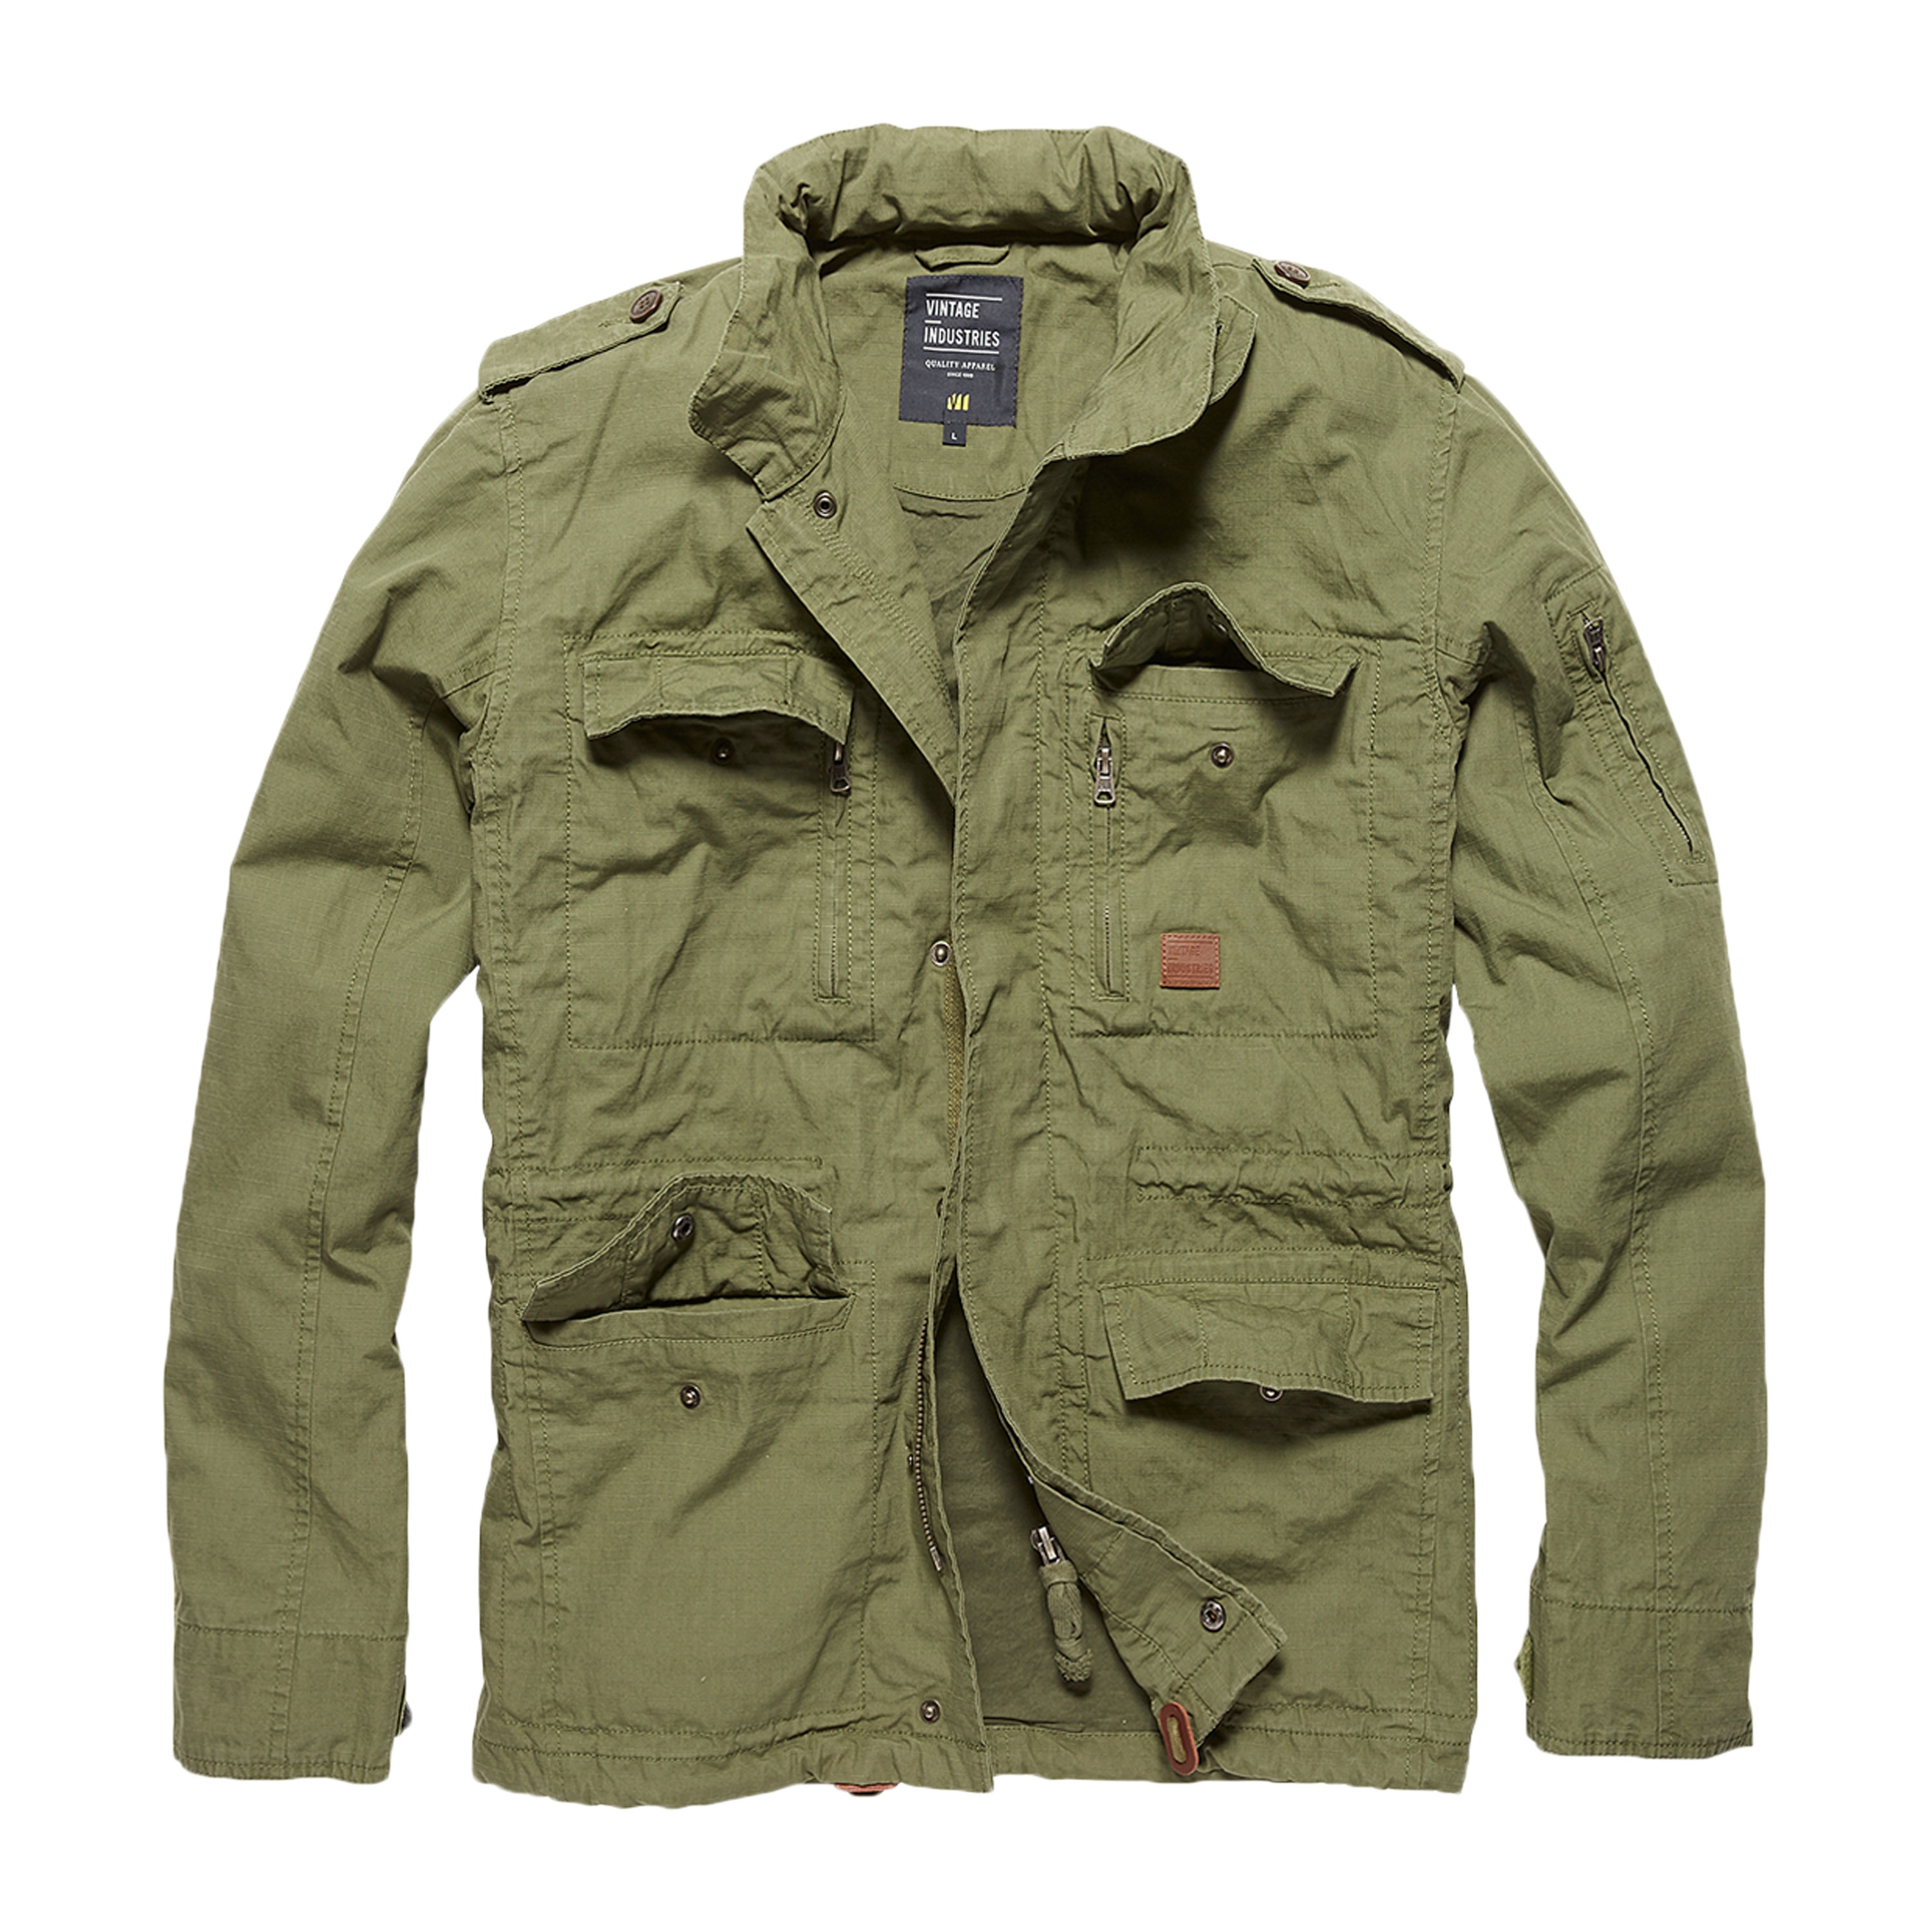 Purchase the Vintage Cranford Jacket olive green by ASMC